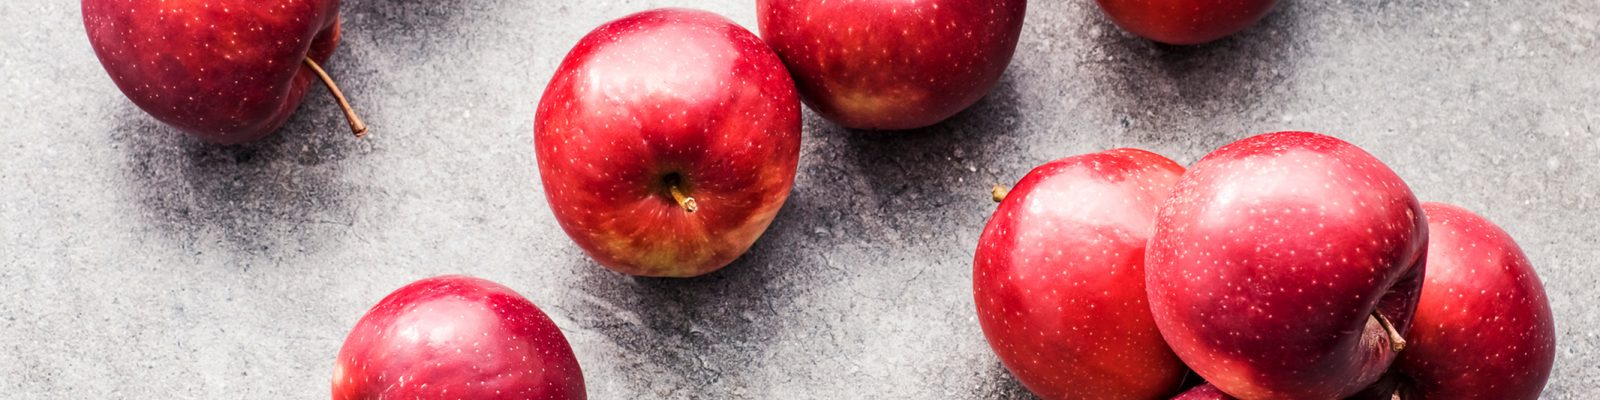 Red Prince® Apples Information and Facts